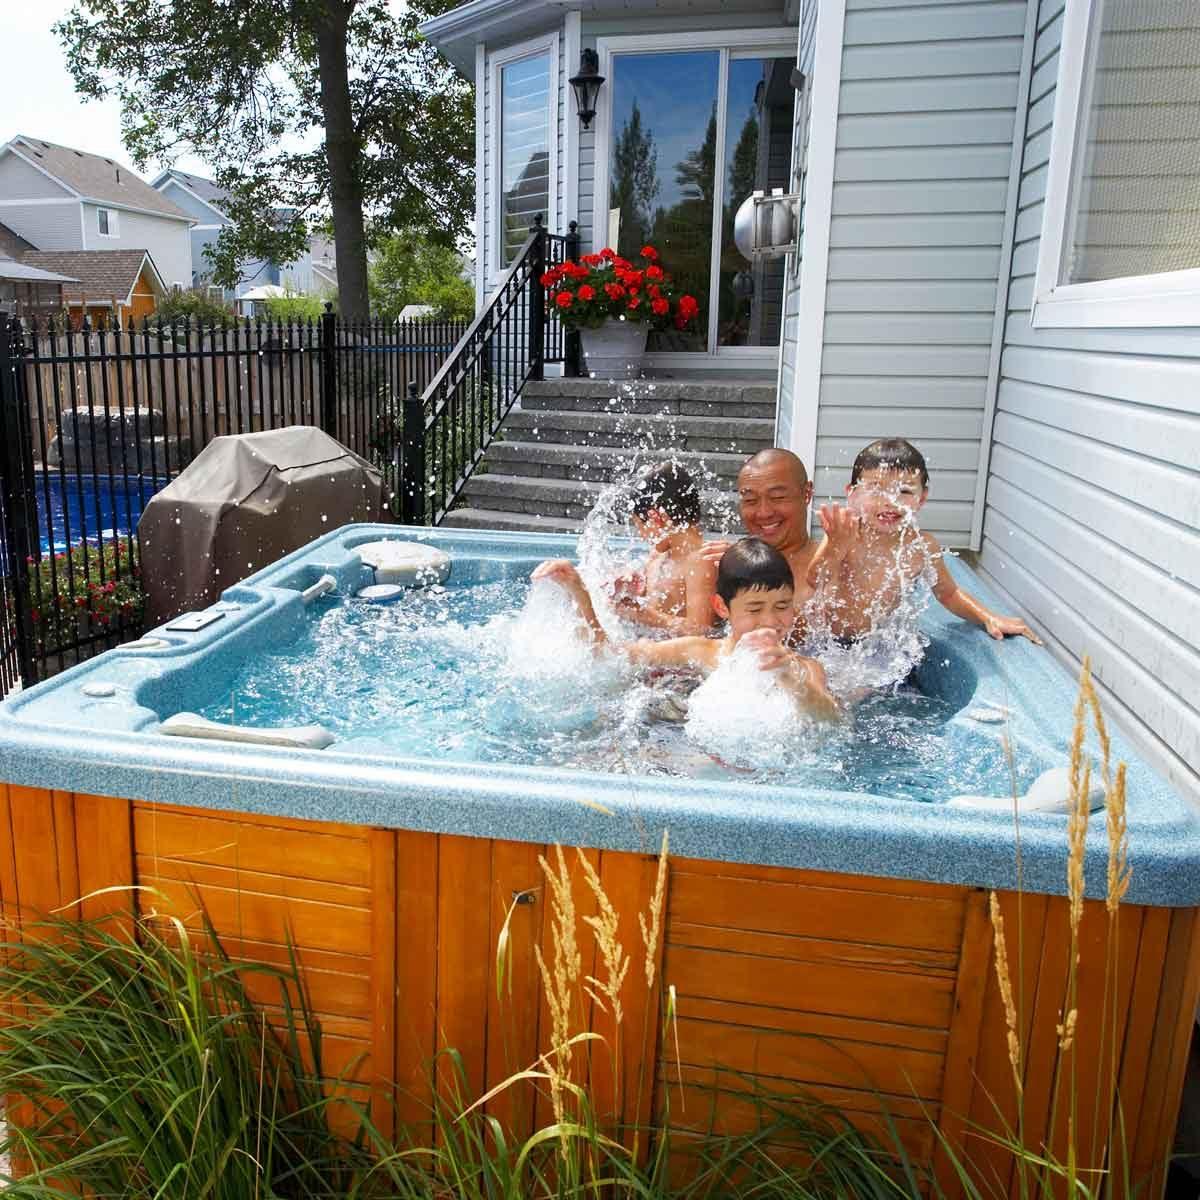 8 Questions to Ask Before Buying a Hot Tub